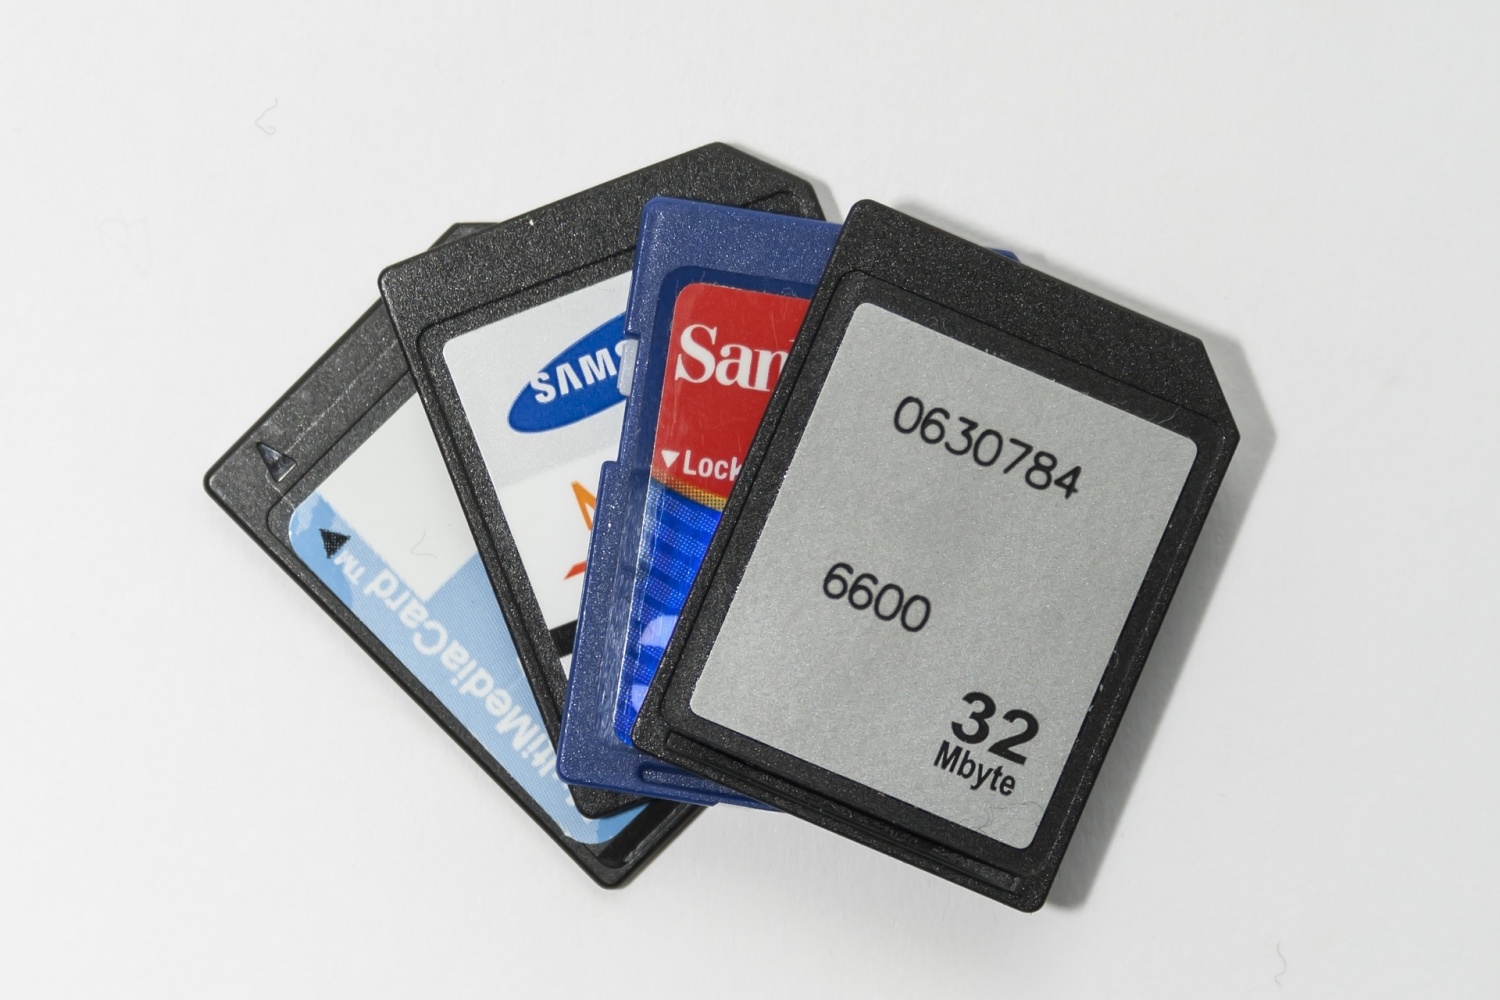 What are the Different Types Of SD Cards?